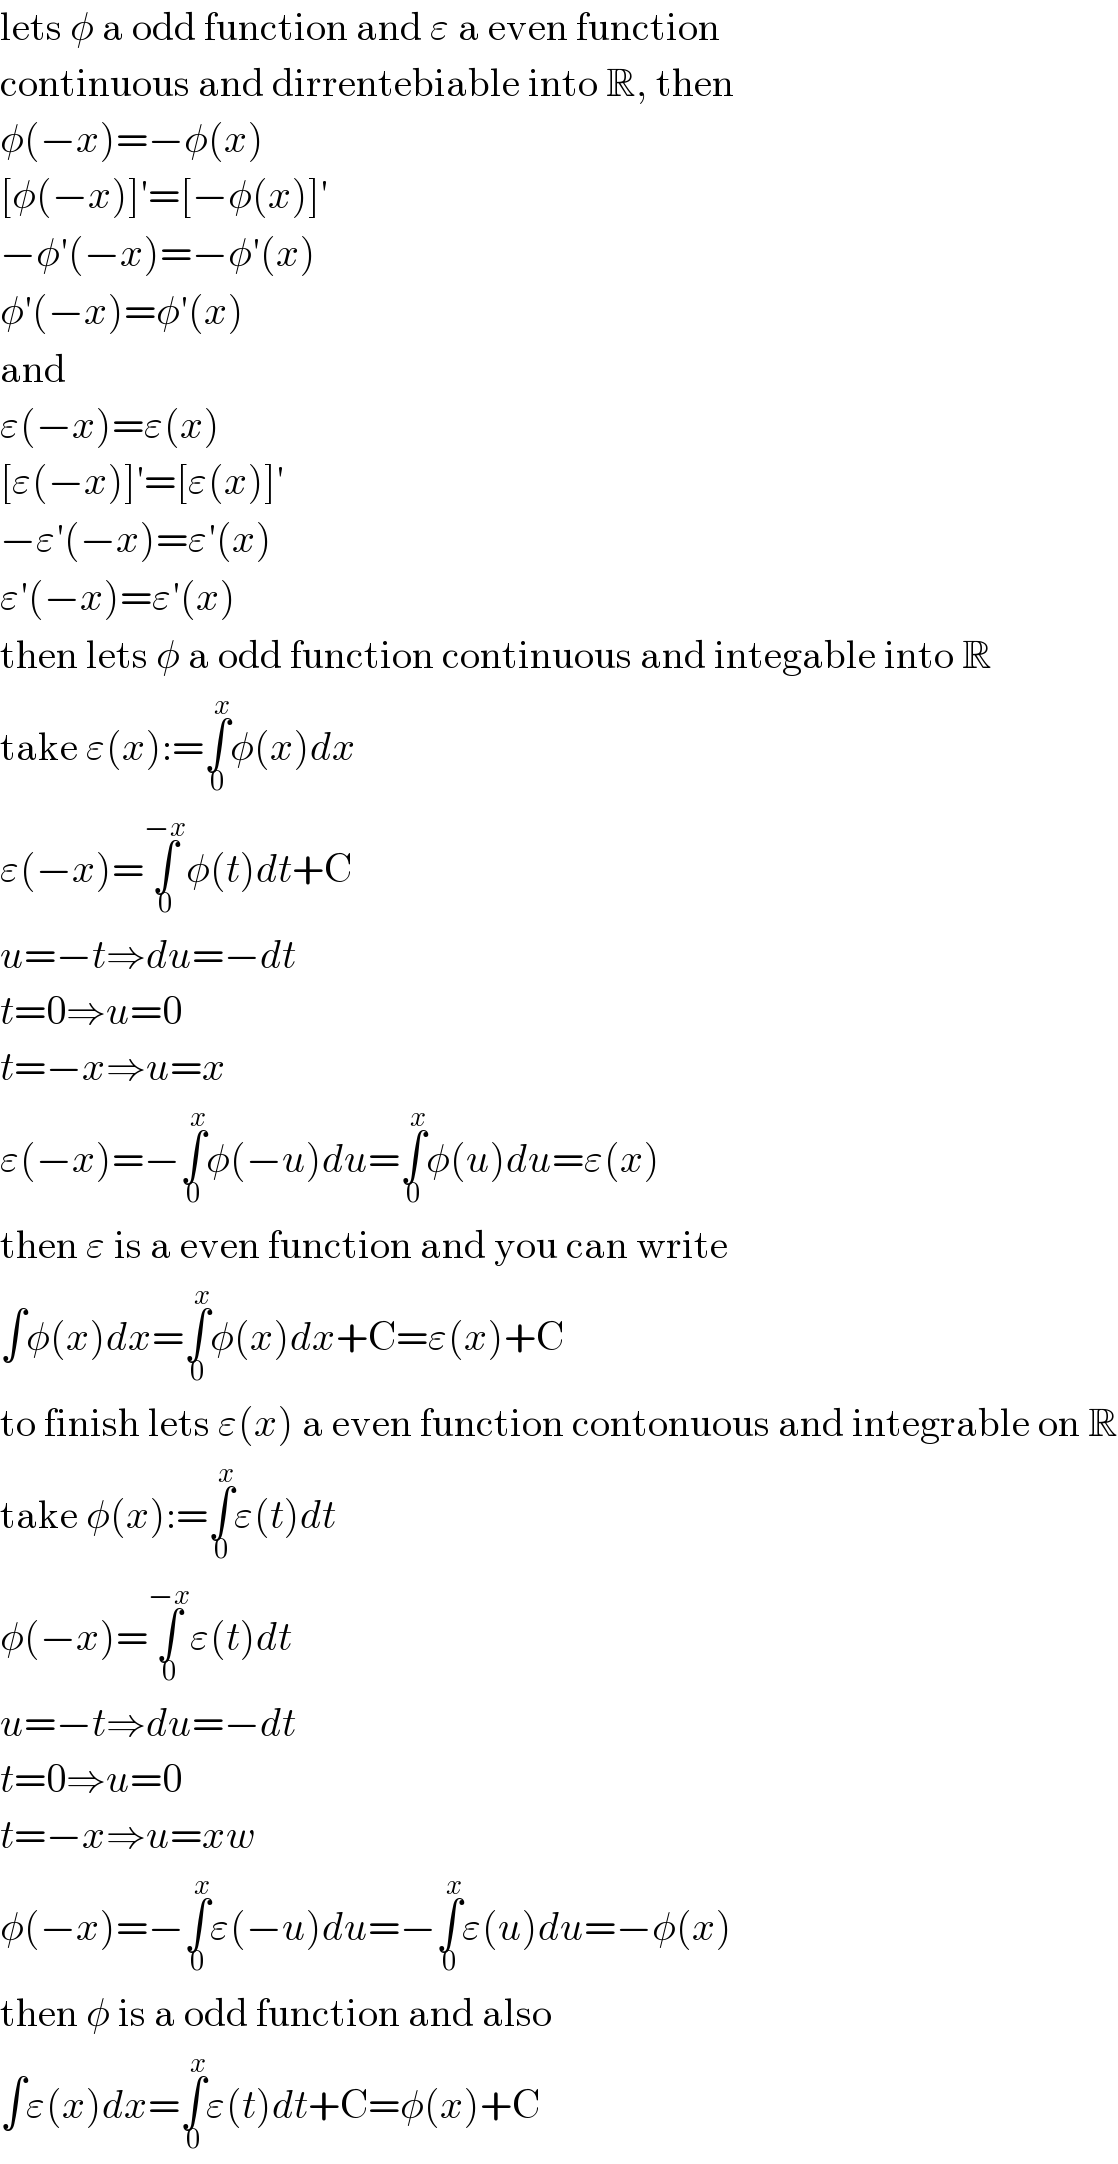 lets φ a odd function and ε a even function  continuous and dirrentebiable into R, then  φ(−x)=−φ(x)  [φ(−x)]′=[−φ(x)]′  −φ′(−x)=−φ′(x)  φ′(−x)=φ′(x)  and  ε(−x)=ε(x)  [ε(−x)]′=[ε(x)]′  −ε′(−x)=ε′(x)  ε′(−x)=ε′(x)  then lets φ a odd function continuous and integable into R  take ε(x):=∫_0 ^x φ(x)dx  ε(−x)=∫_0 ^(−x) φ(t)dt+C  u=−t⇒du=−dt  t=0⇒u=0  t=−x⇒u=x  ε(−x)=−∫_0 ^x φ(−u)du=∫_0 ^x φ(u)du=ε(x)  then ε is a even function and you can write  ∫φ(x)dx=∫_0 ^x φ(x)dx+C=ε(x)+C  to finish lets ε(x) a even function contonuous and integrable on R  take φ(x):=∫_0 ^x ε(t)dt  φ(−x)=∫_0 ^(−x) ε(t)dt  u=−t⇒du=−dt  t=0⇒u=0  t=−x⇒u=xw  φ(−x)=−∫_0 ^x ε(−u)du=−∫_0 ^x ε(u)du=−φ(x)  then φ is a odd function and also  ∫ε(x)dx=∫_0 ^x ε(t)dt+C=φ(x)+C  